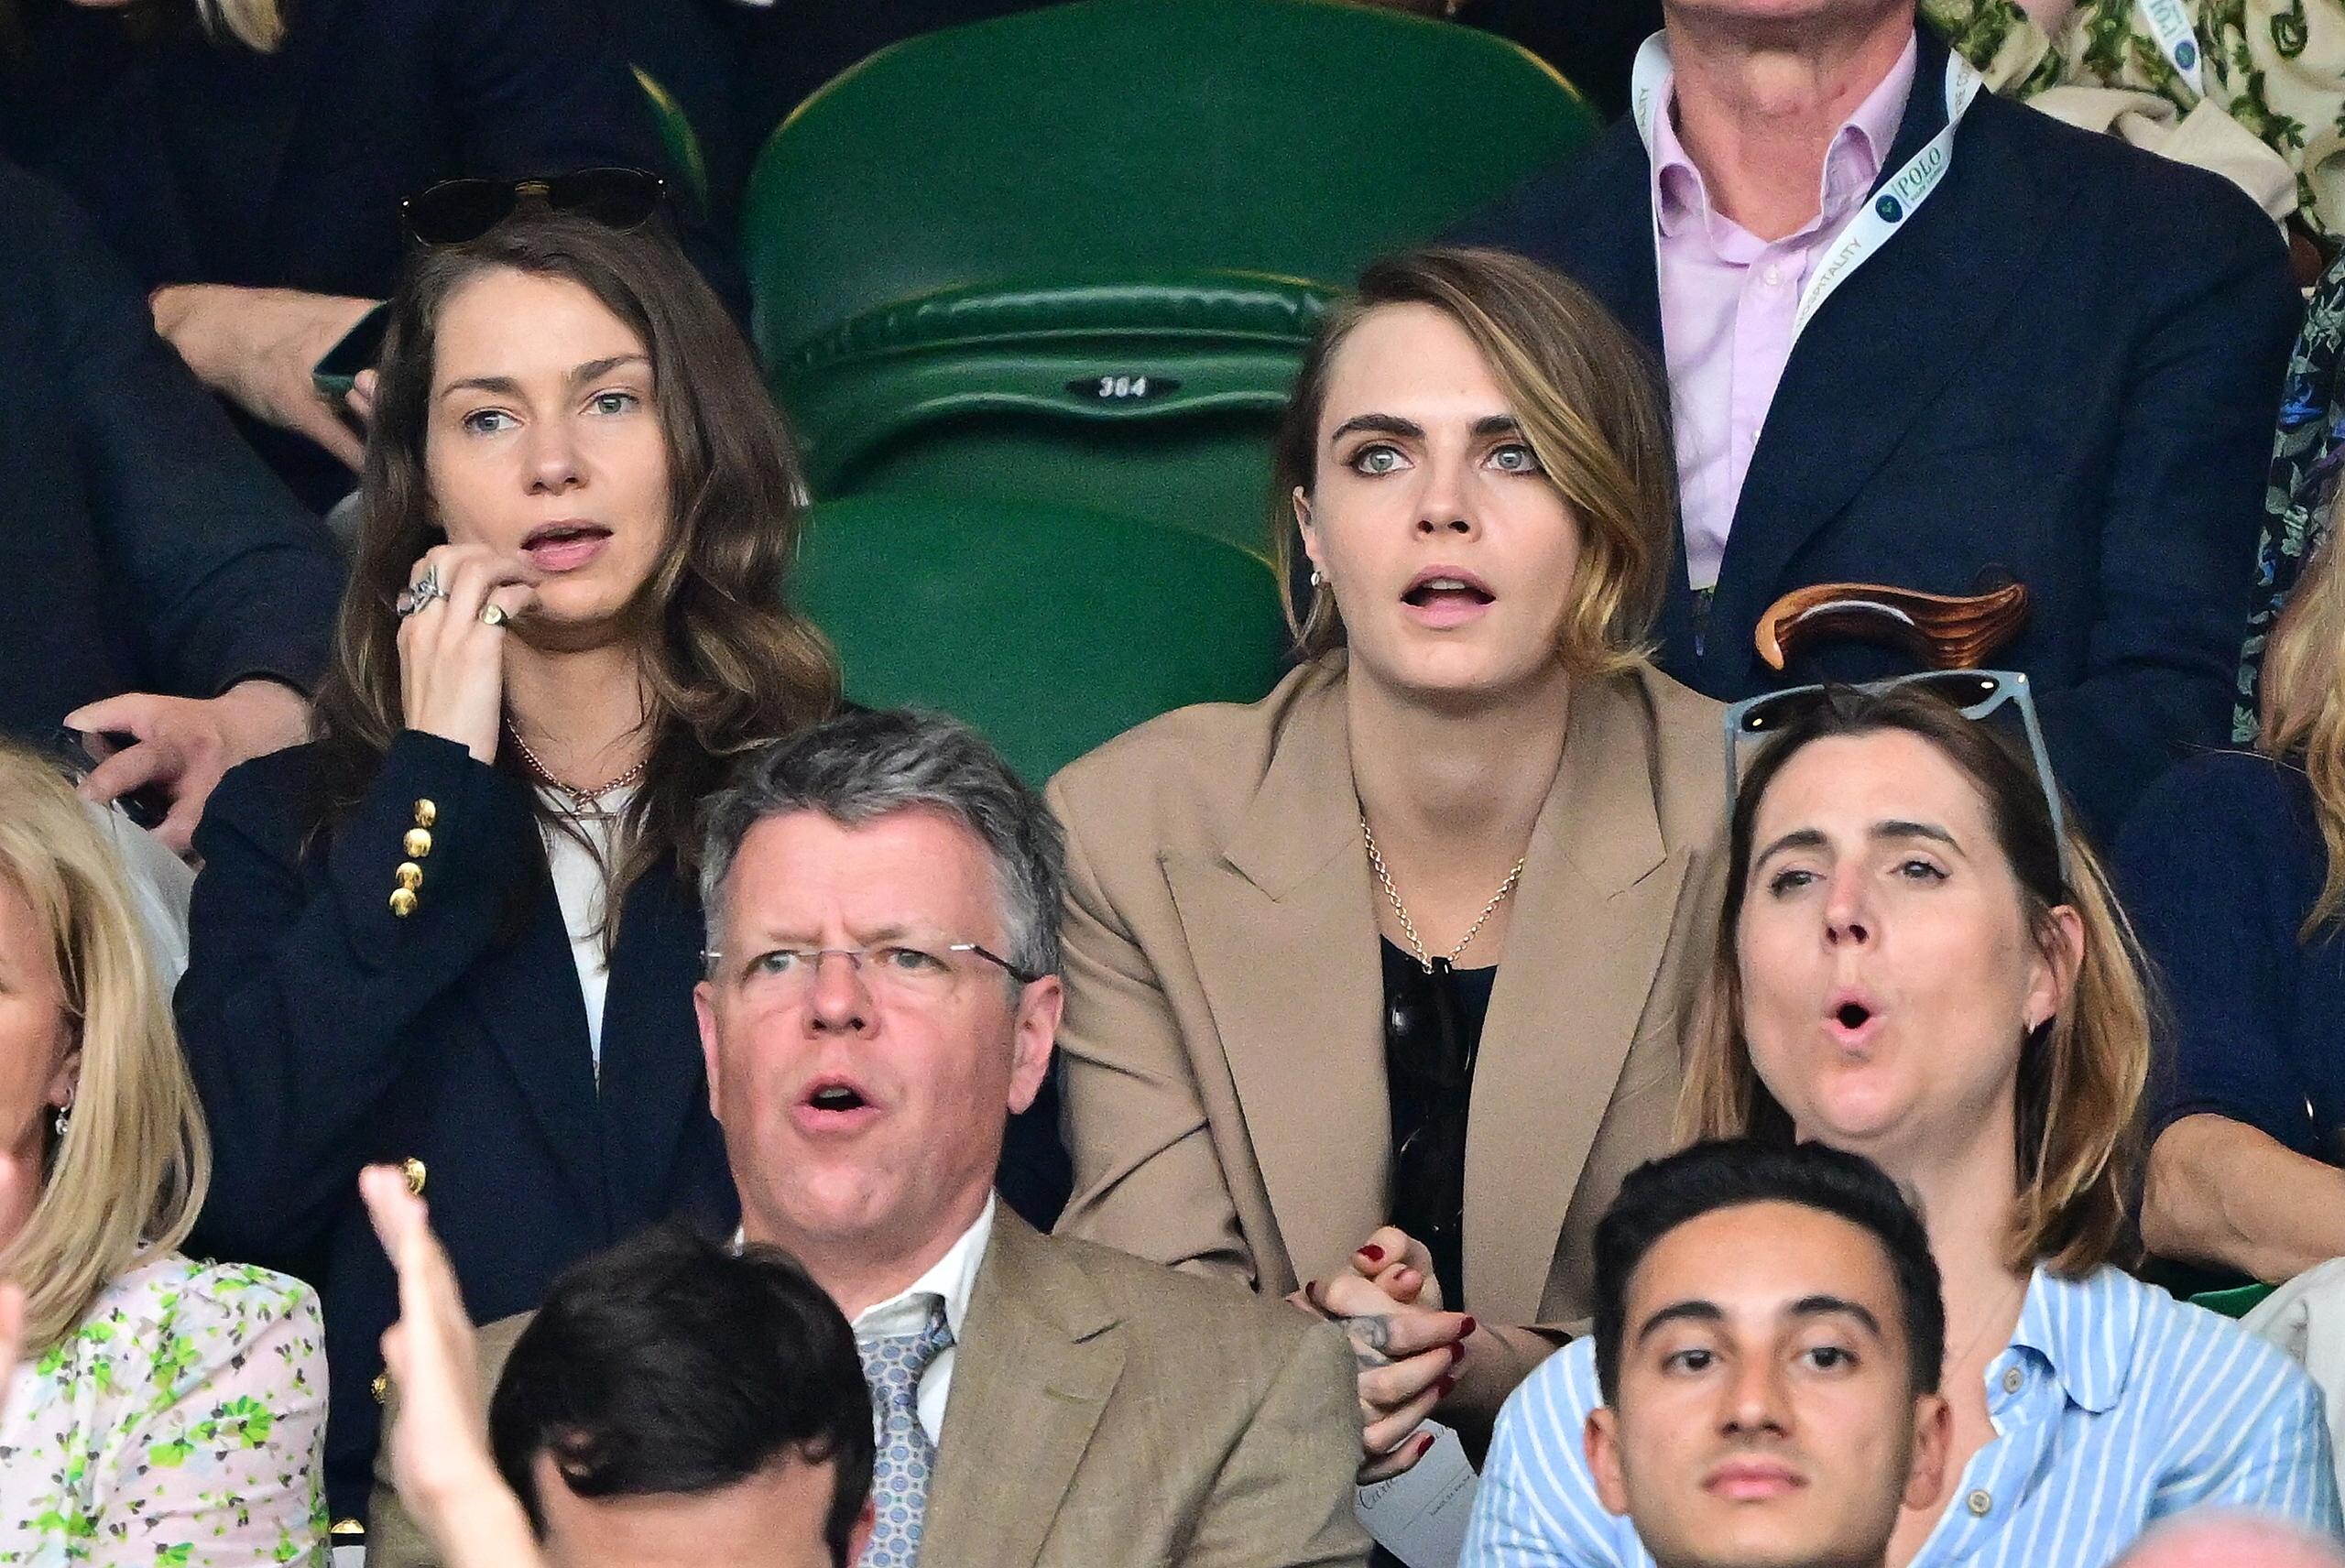 Cara Delevingne and girlfriend Minke sighted at Wimbledon 2023 - Day 8